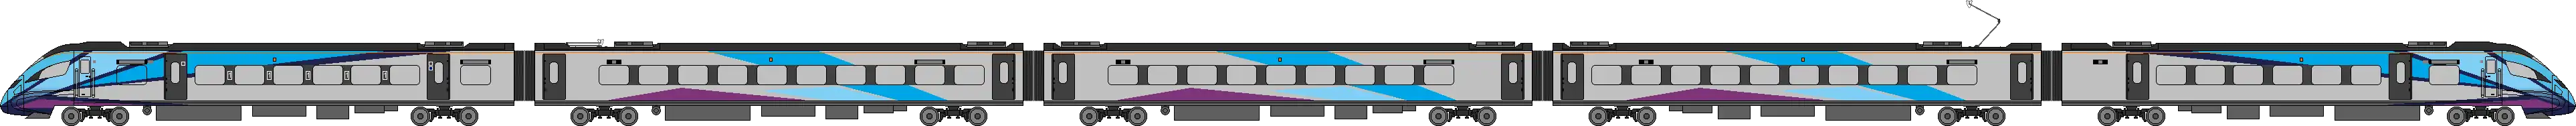 TPE Class 397 with pantograph